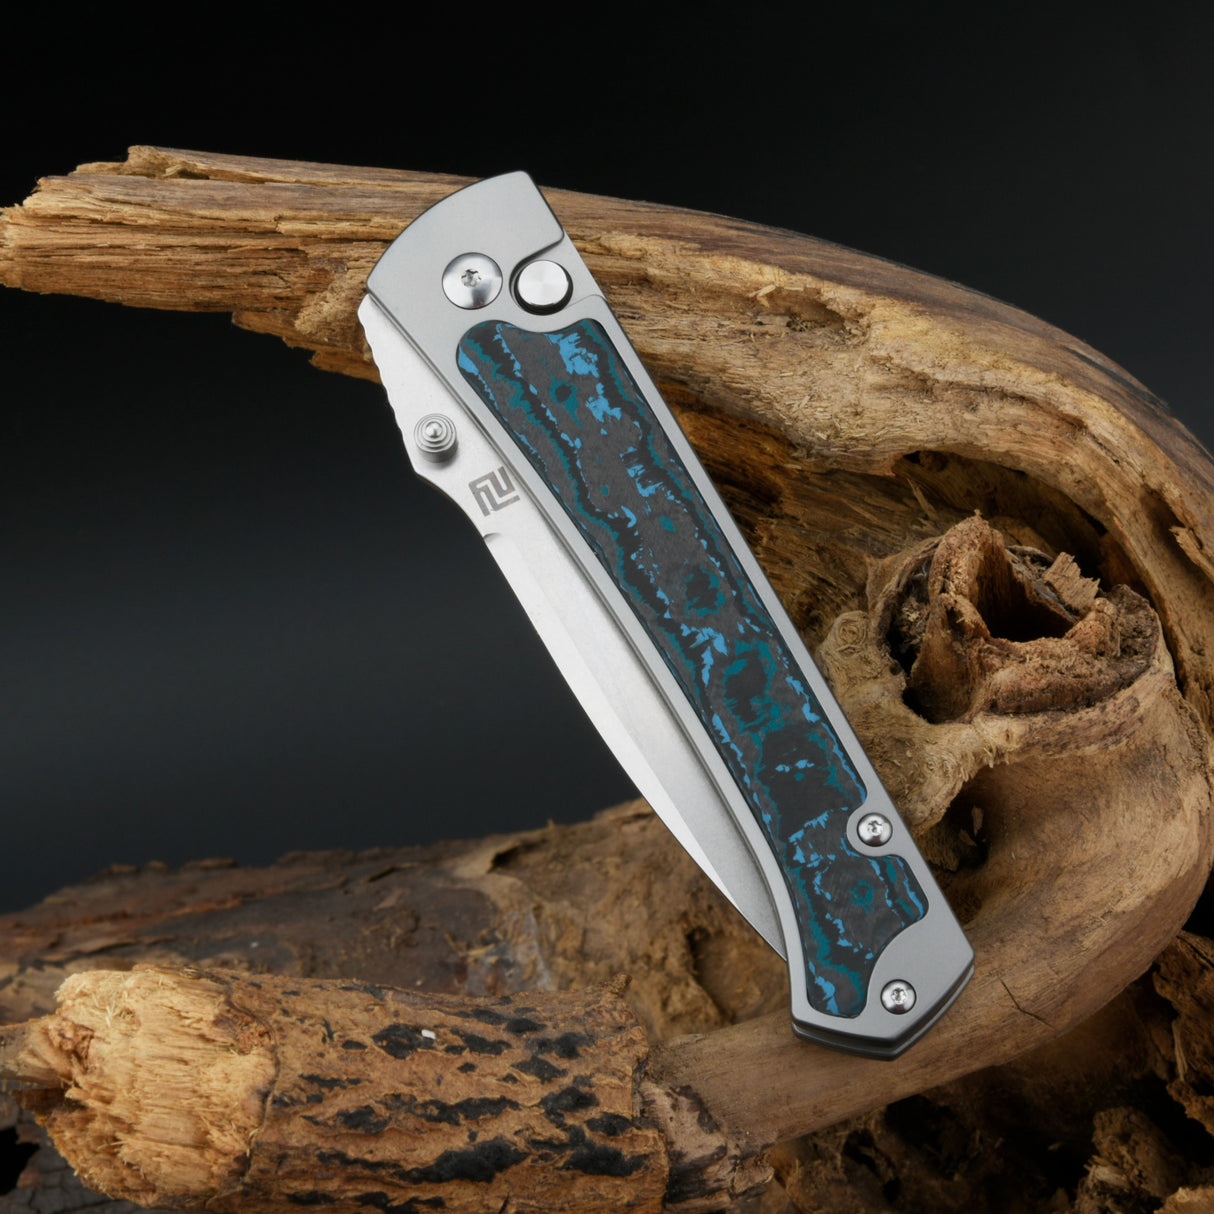 Artisan Cutlery Andromeda 1856G-FCG M390 Blade Titanium and Fat Carbon Handle Folding Knife (Limited Edition)